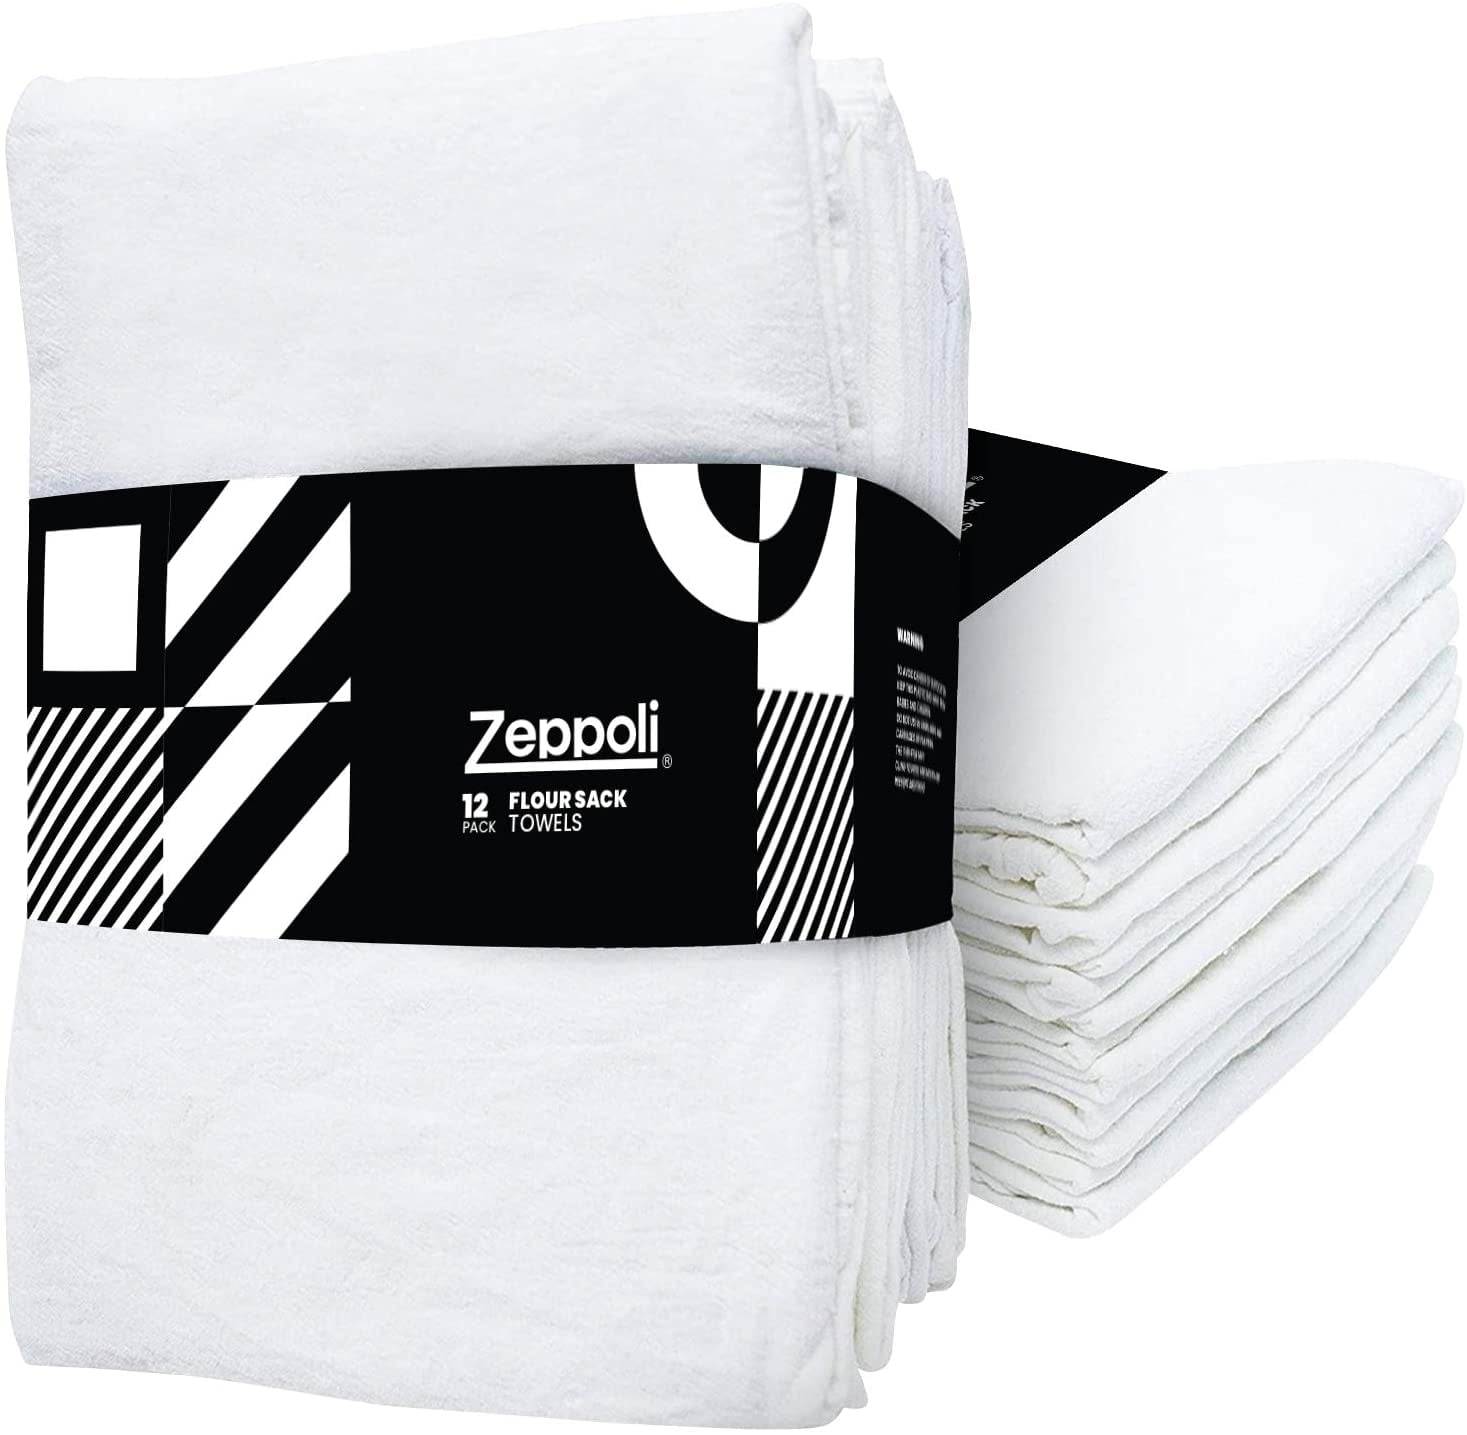  Zeppoli Classic Dish Towels - 30 Pack - 14 by 25 - 100%  Cotton Kitchen Towels - Reusable Bulk Cleaning Cloths - Blue Hand Towels -  Super Absorbent - Machine Washable: Home & Kitchen